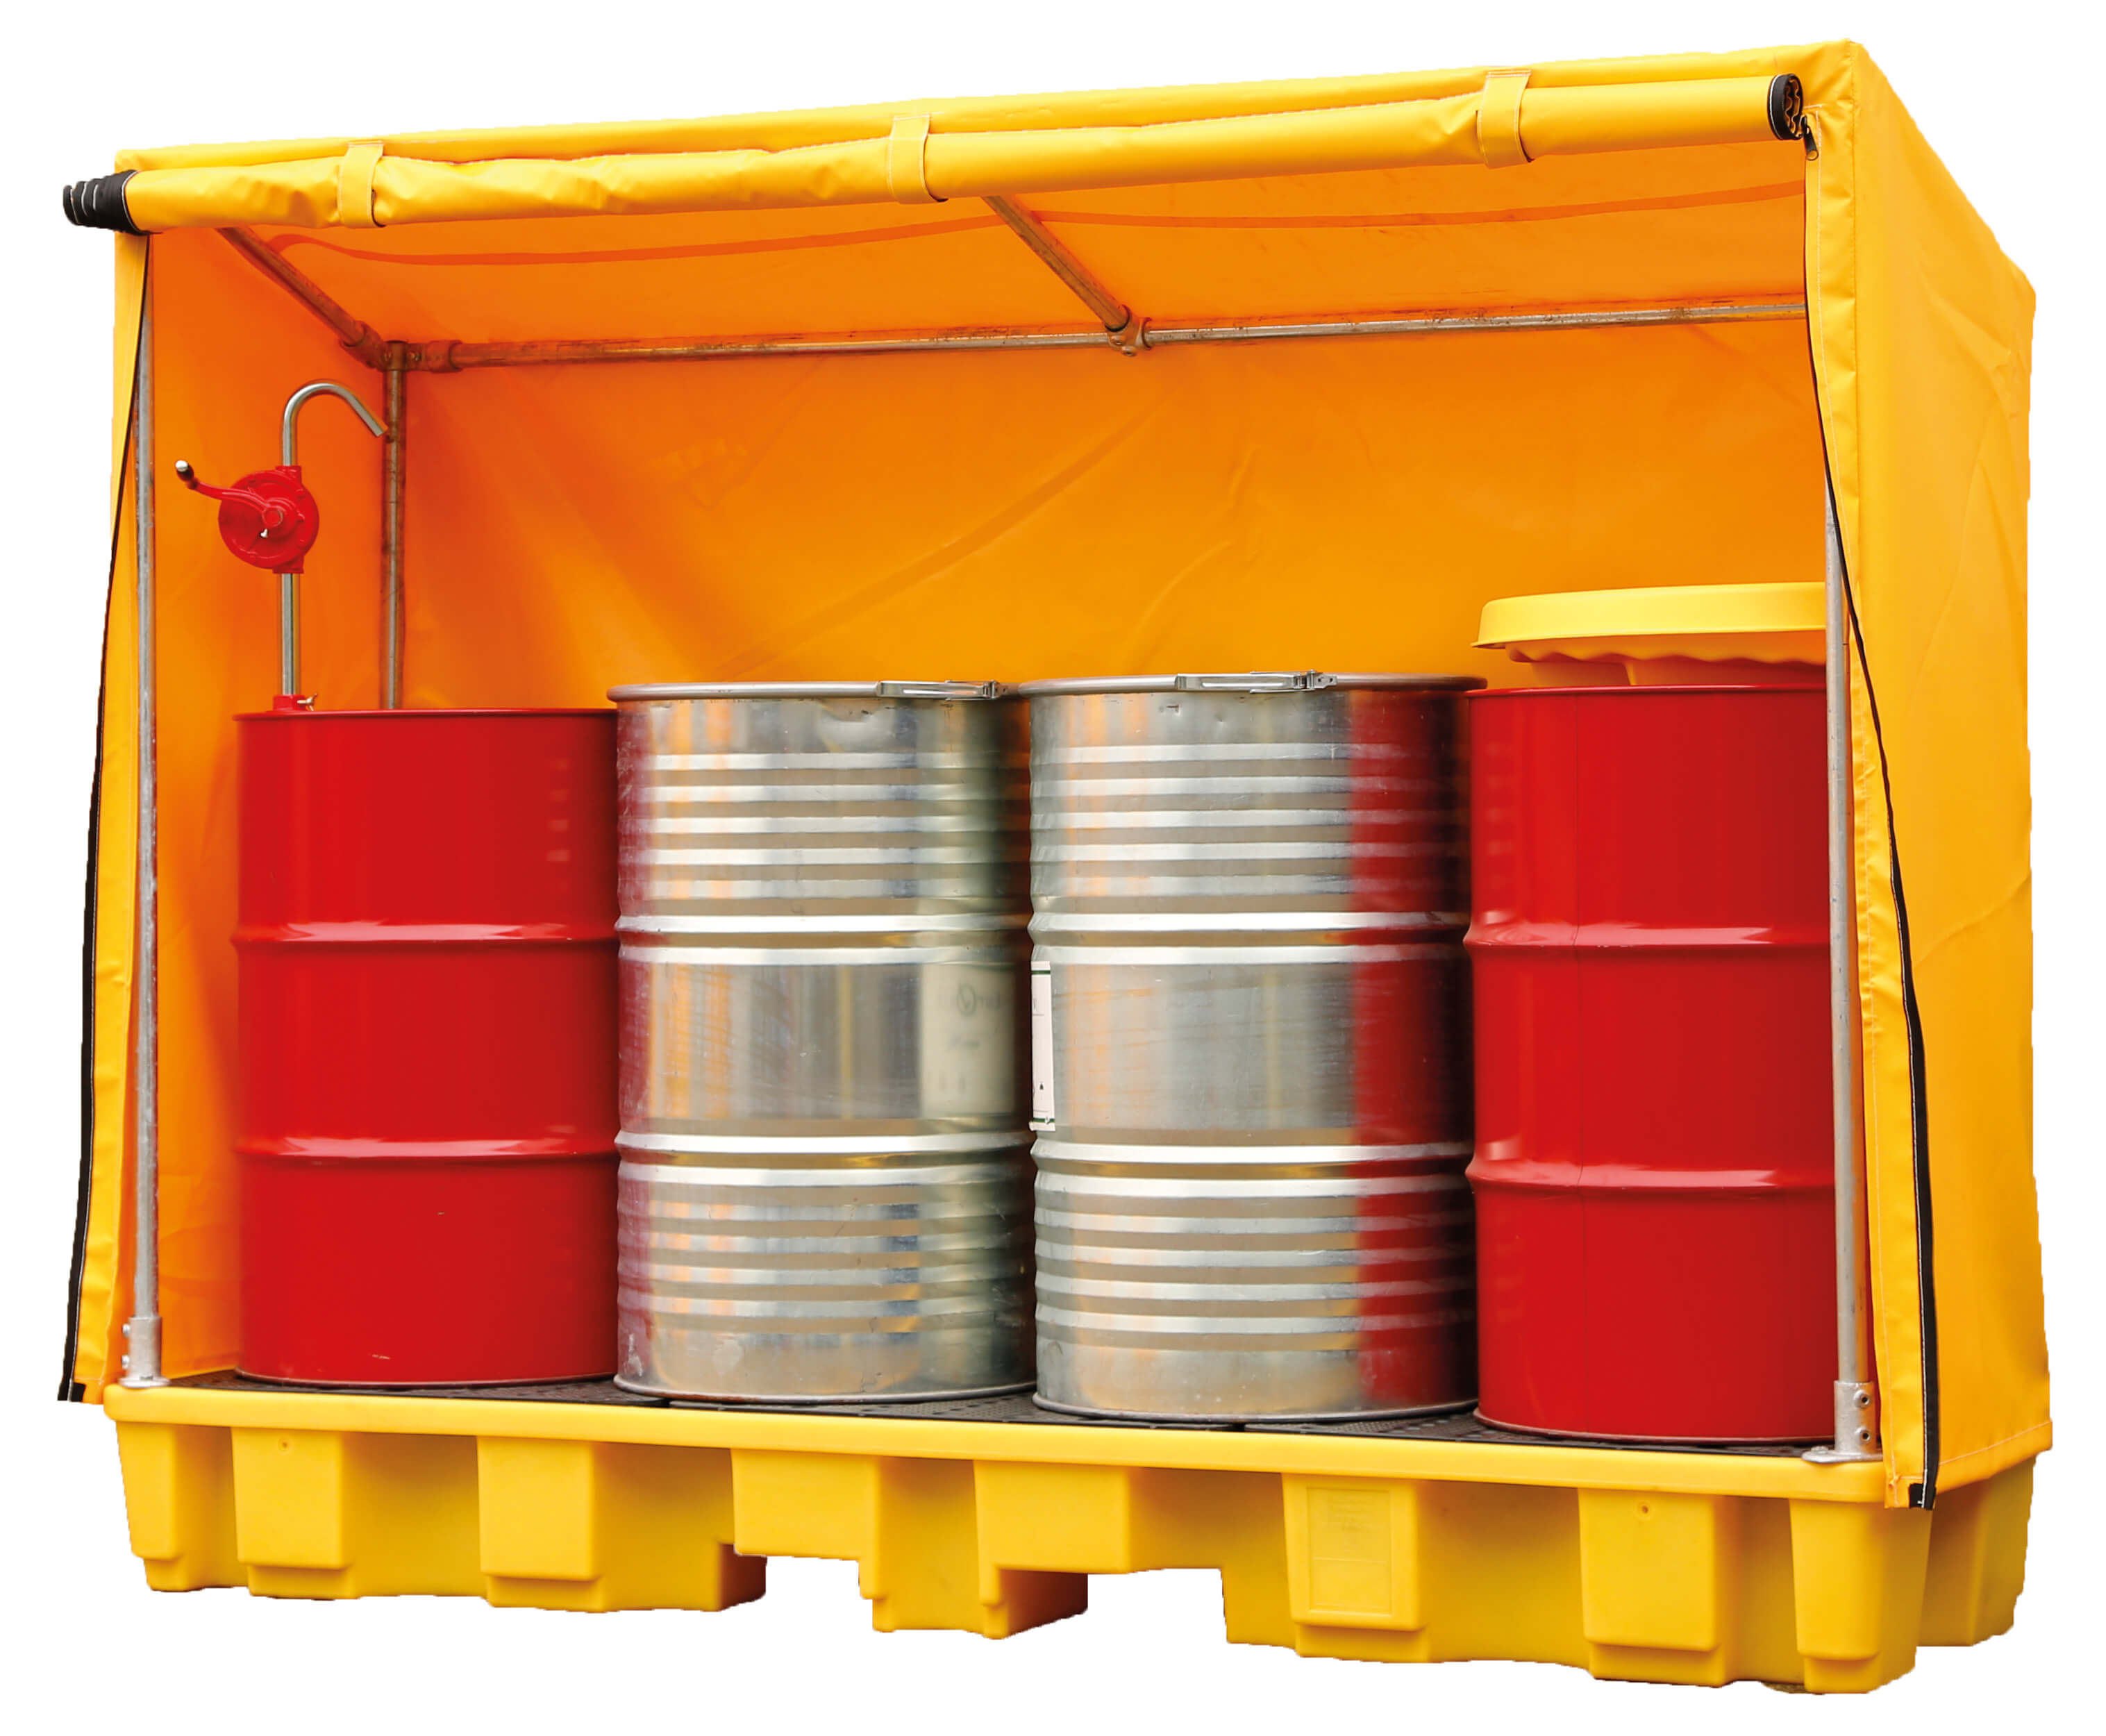 4 Drum In-Line Spill Pallet with Framed Cover (4 x 1)